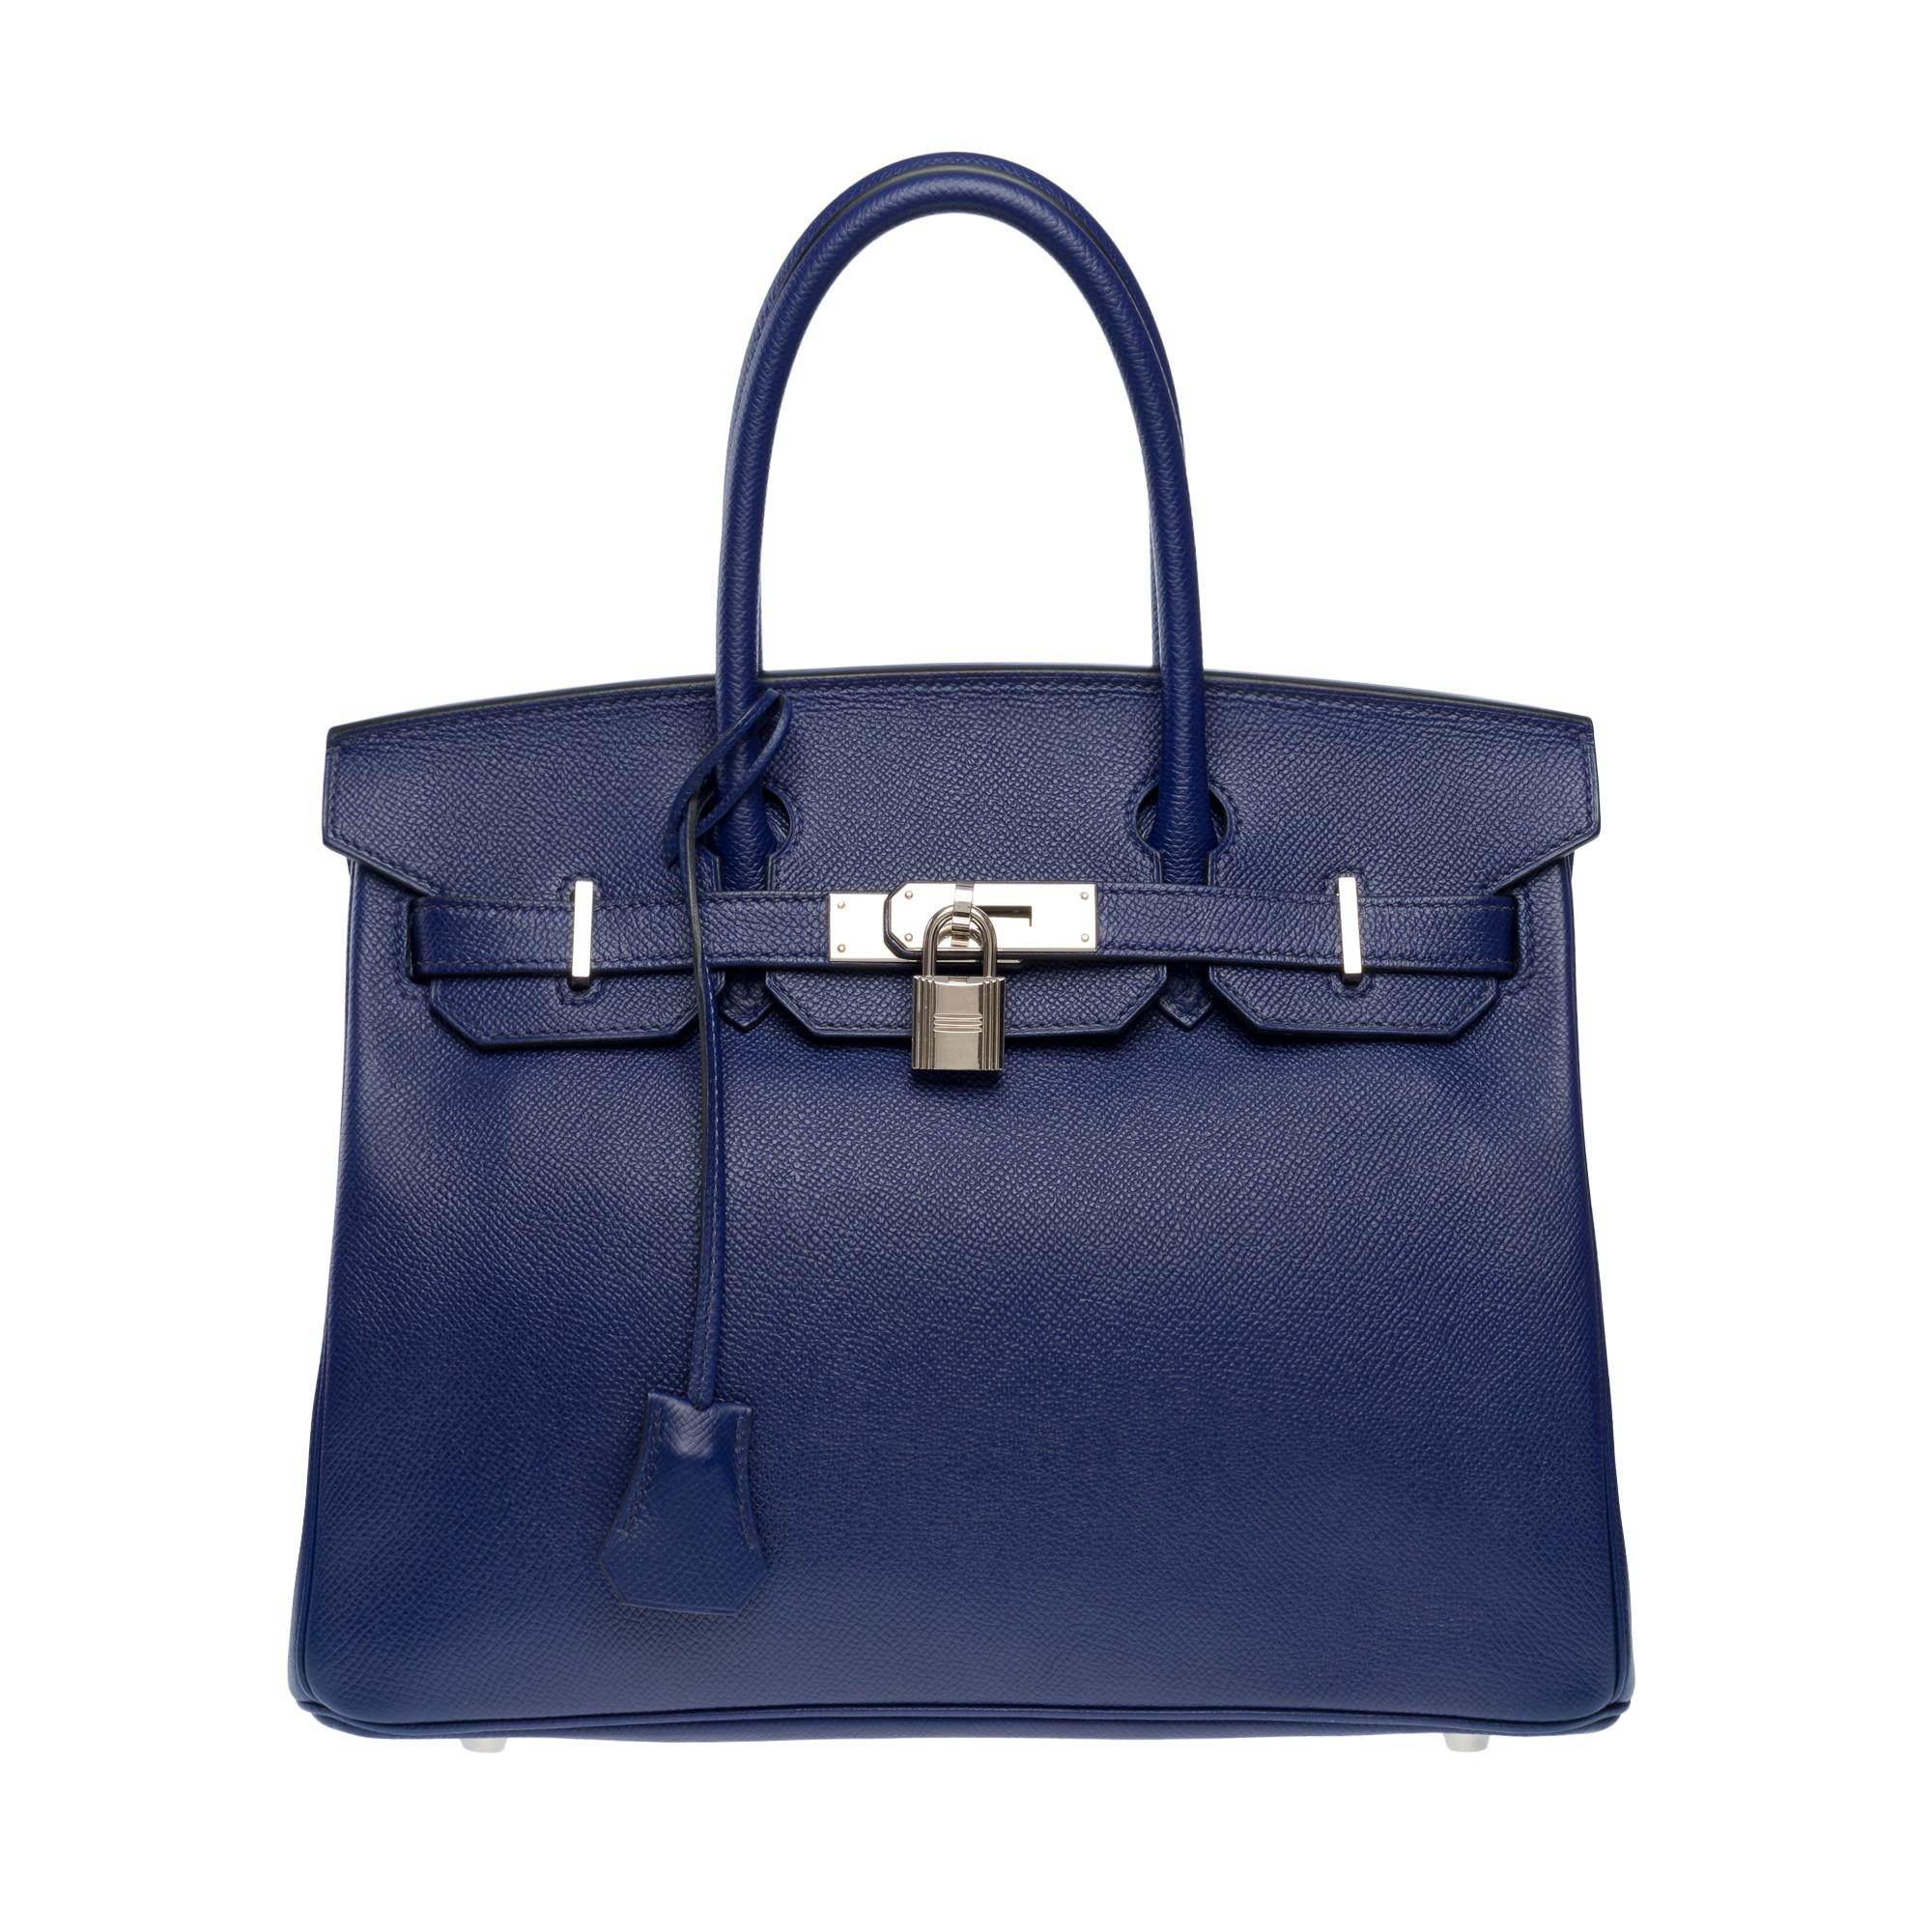 Stunning​ ​Hermes​ ​Birkin​ ​30​ ​in​ ​Blue​ ​Sapphire​ ​Epsom​ ​calf​ ​leather​ ​,​ ​palladium​ ​silver​ ​metal​ ​trim​ ​,​ ​double​ ​handle​ ​in​ ​blue​ ​leather​ ​for​ ​a​ ​hand​ ​carry

Flap​ ​closure
Blue​ ​leather​ ​inner​ ​lining​ ​,​ ​a​